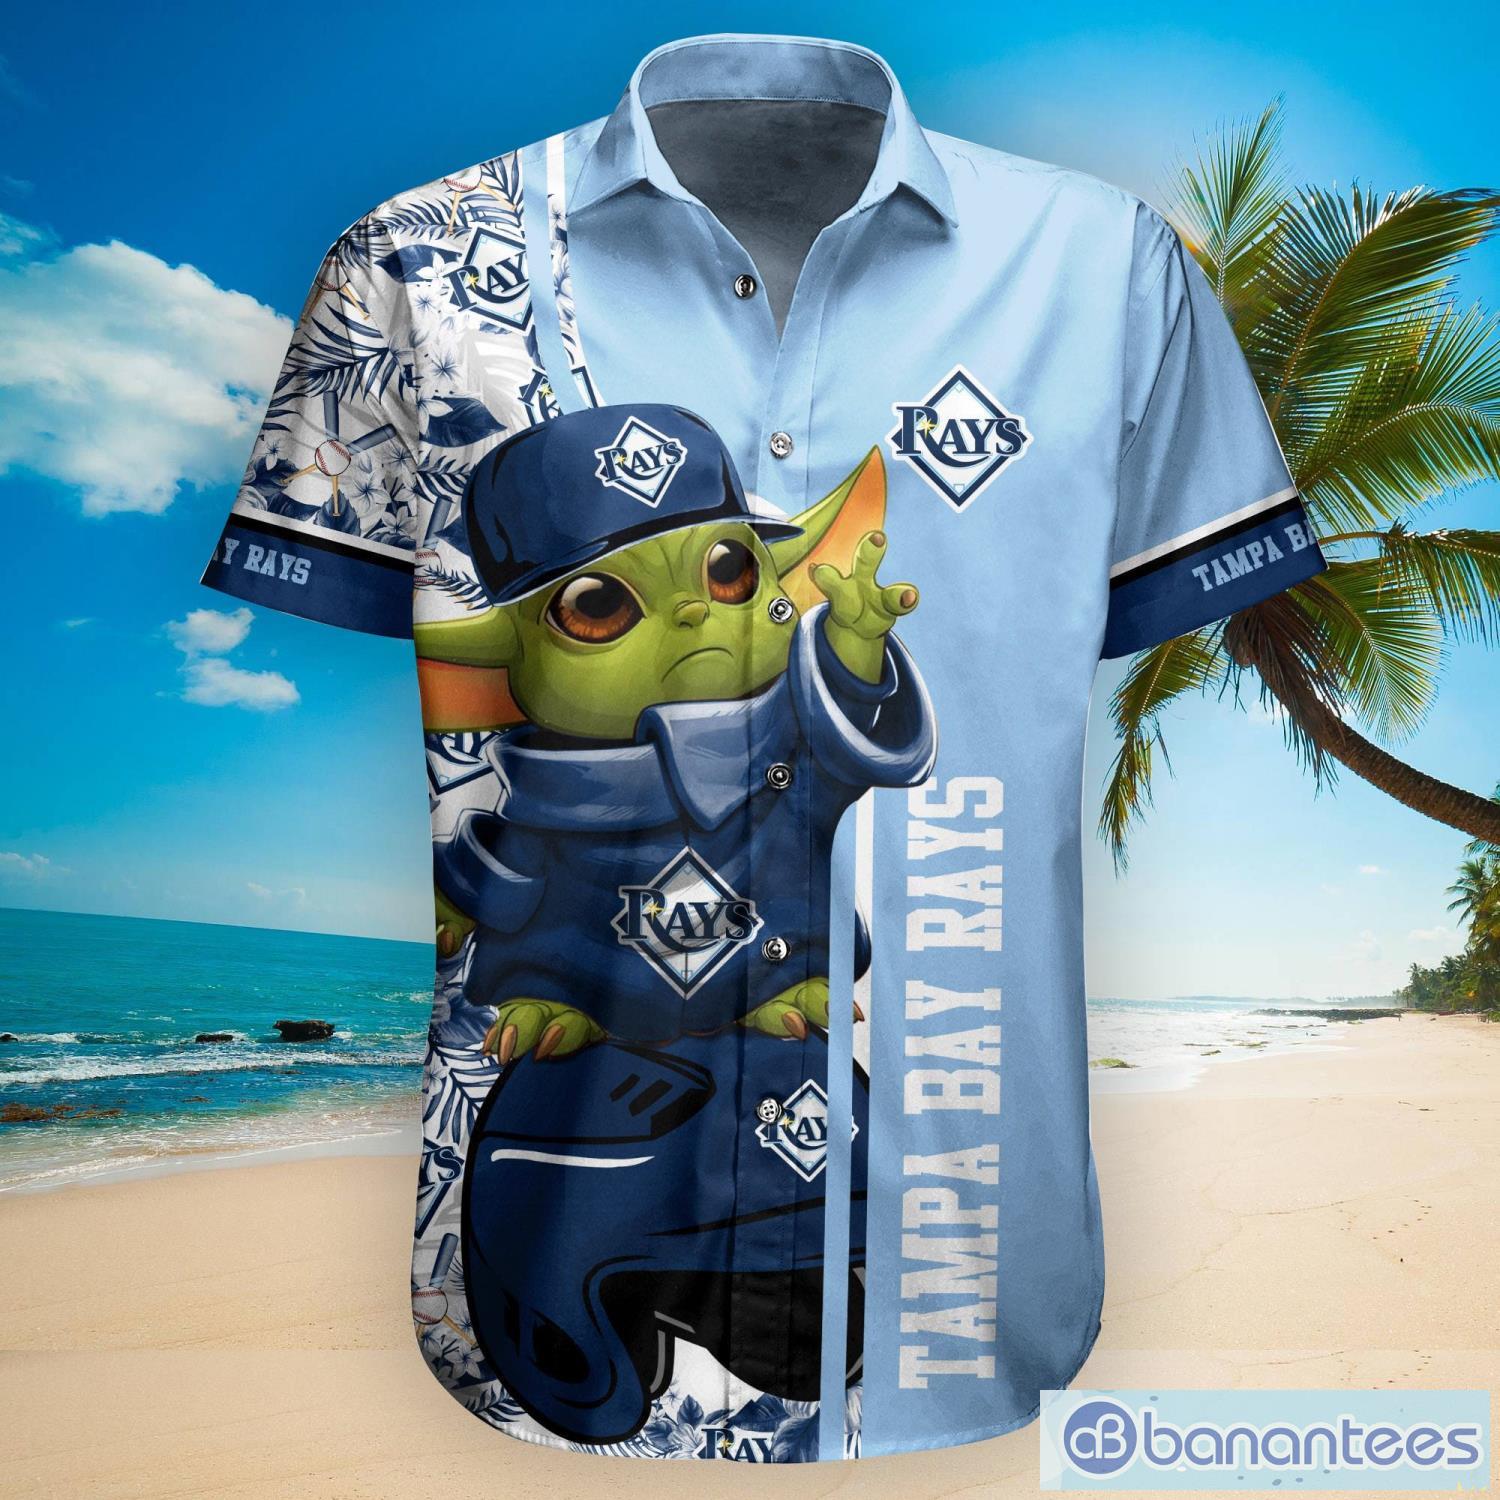 Tampa Bay Rays Baby Yoda Lover 3D T-Shirt For Fans - Banantees